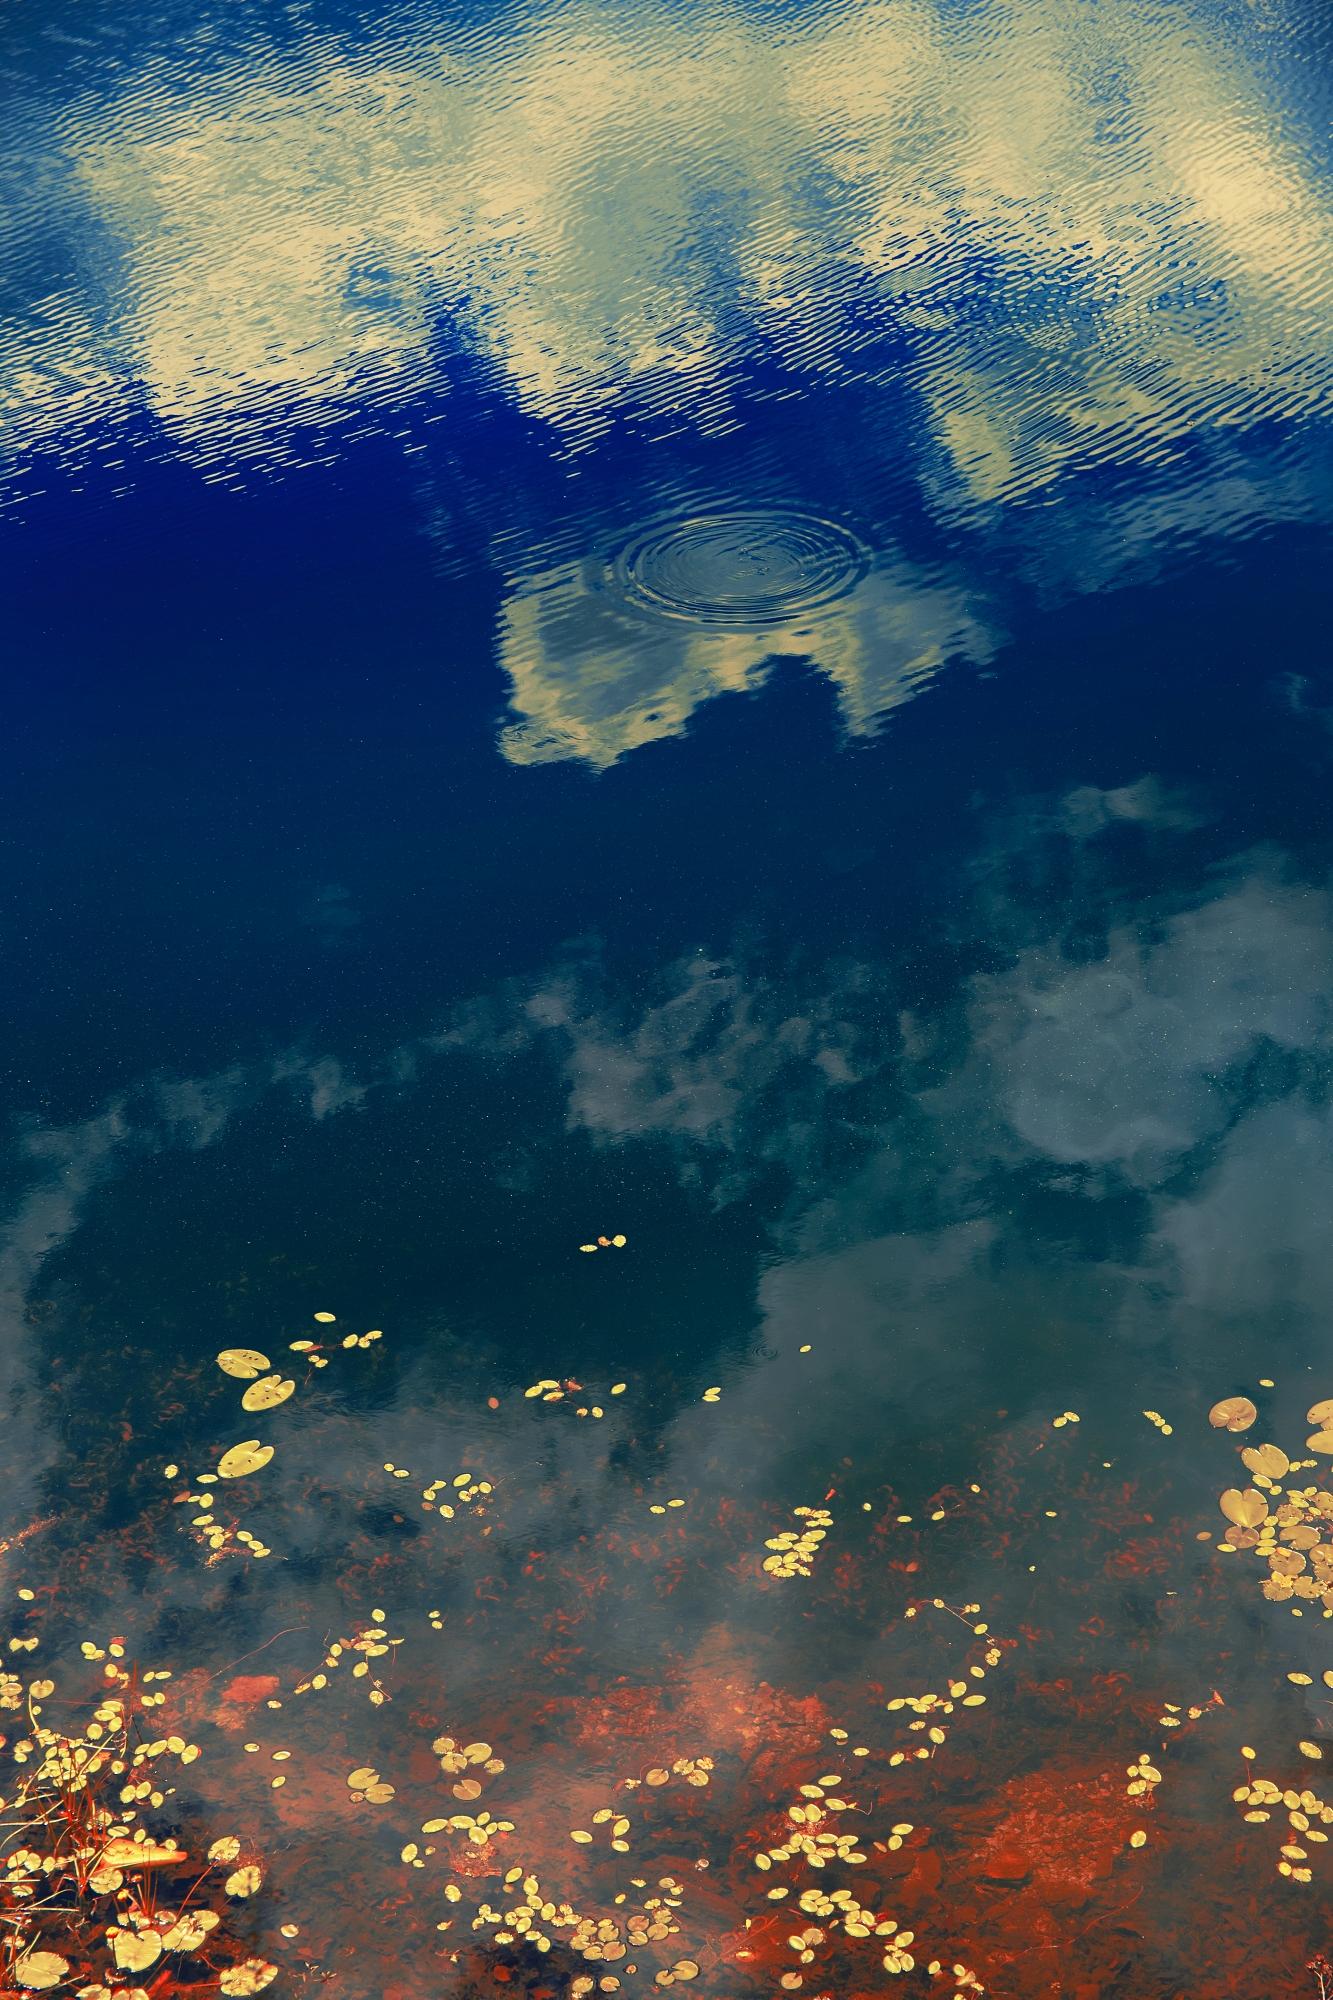 Erik MADIGAN HECK (*1983, United States)
Clouds in Pond, 2019
Chomogenic print
Sheet 152.4 x 101.6 cm (60 x 40 in.)
Edition of 9 plus 2 artist's proofs (#2/9)
print only

Originally from Excelsior, Minnesota, Erik Madigan Heck (*1983) is one of the